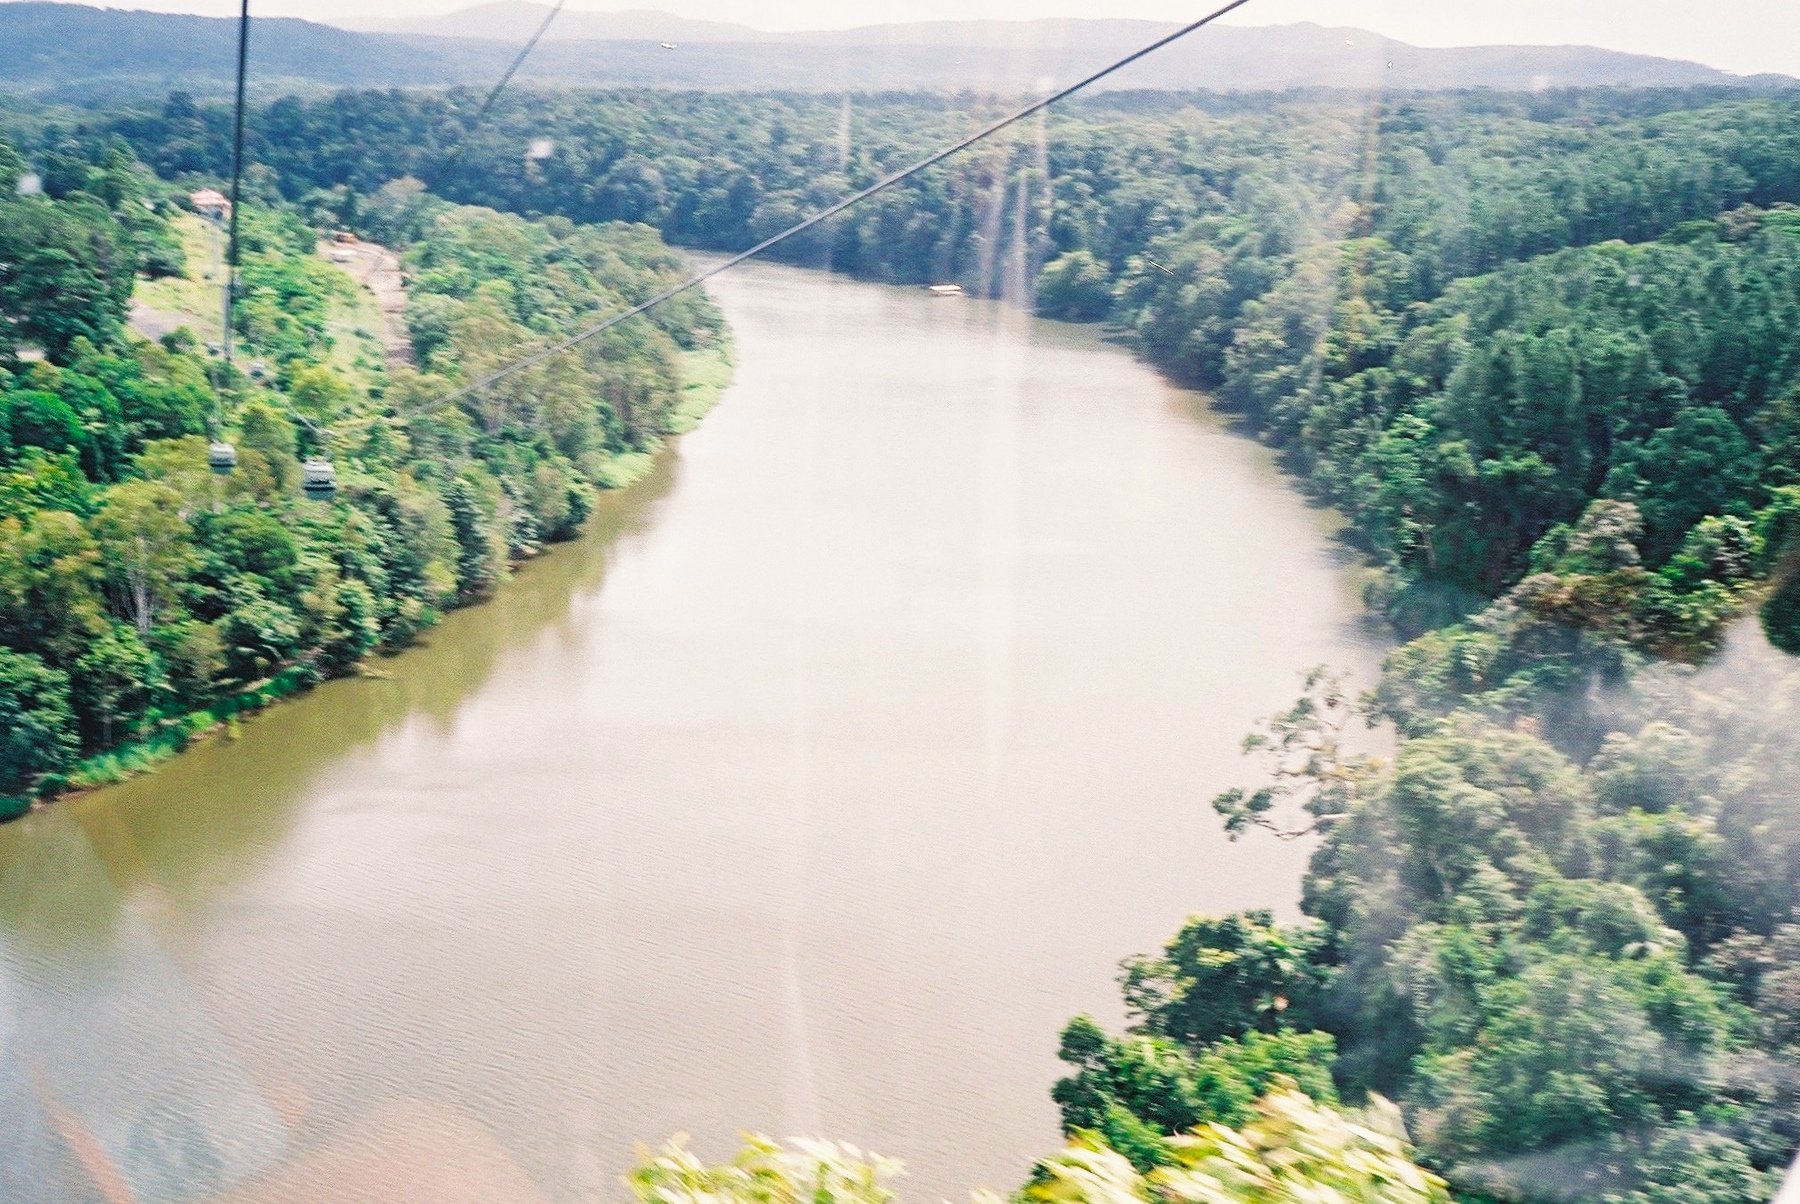 View across a river in the Kuranda rainforest, from high up in a cable car.